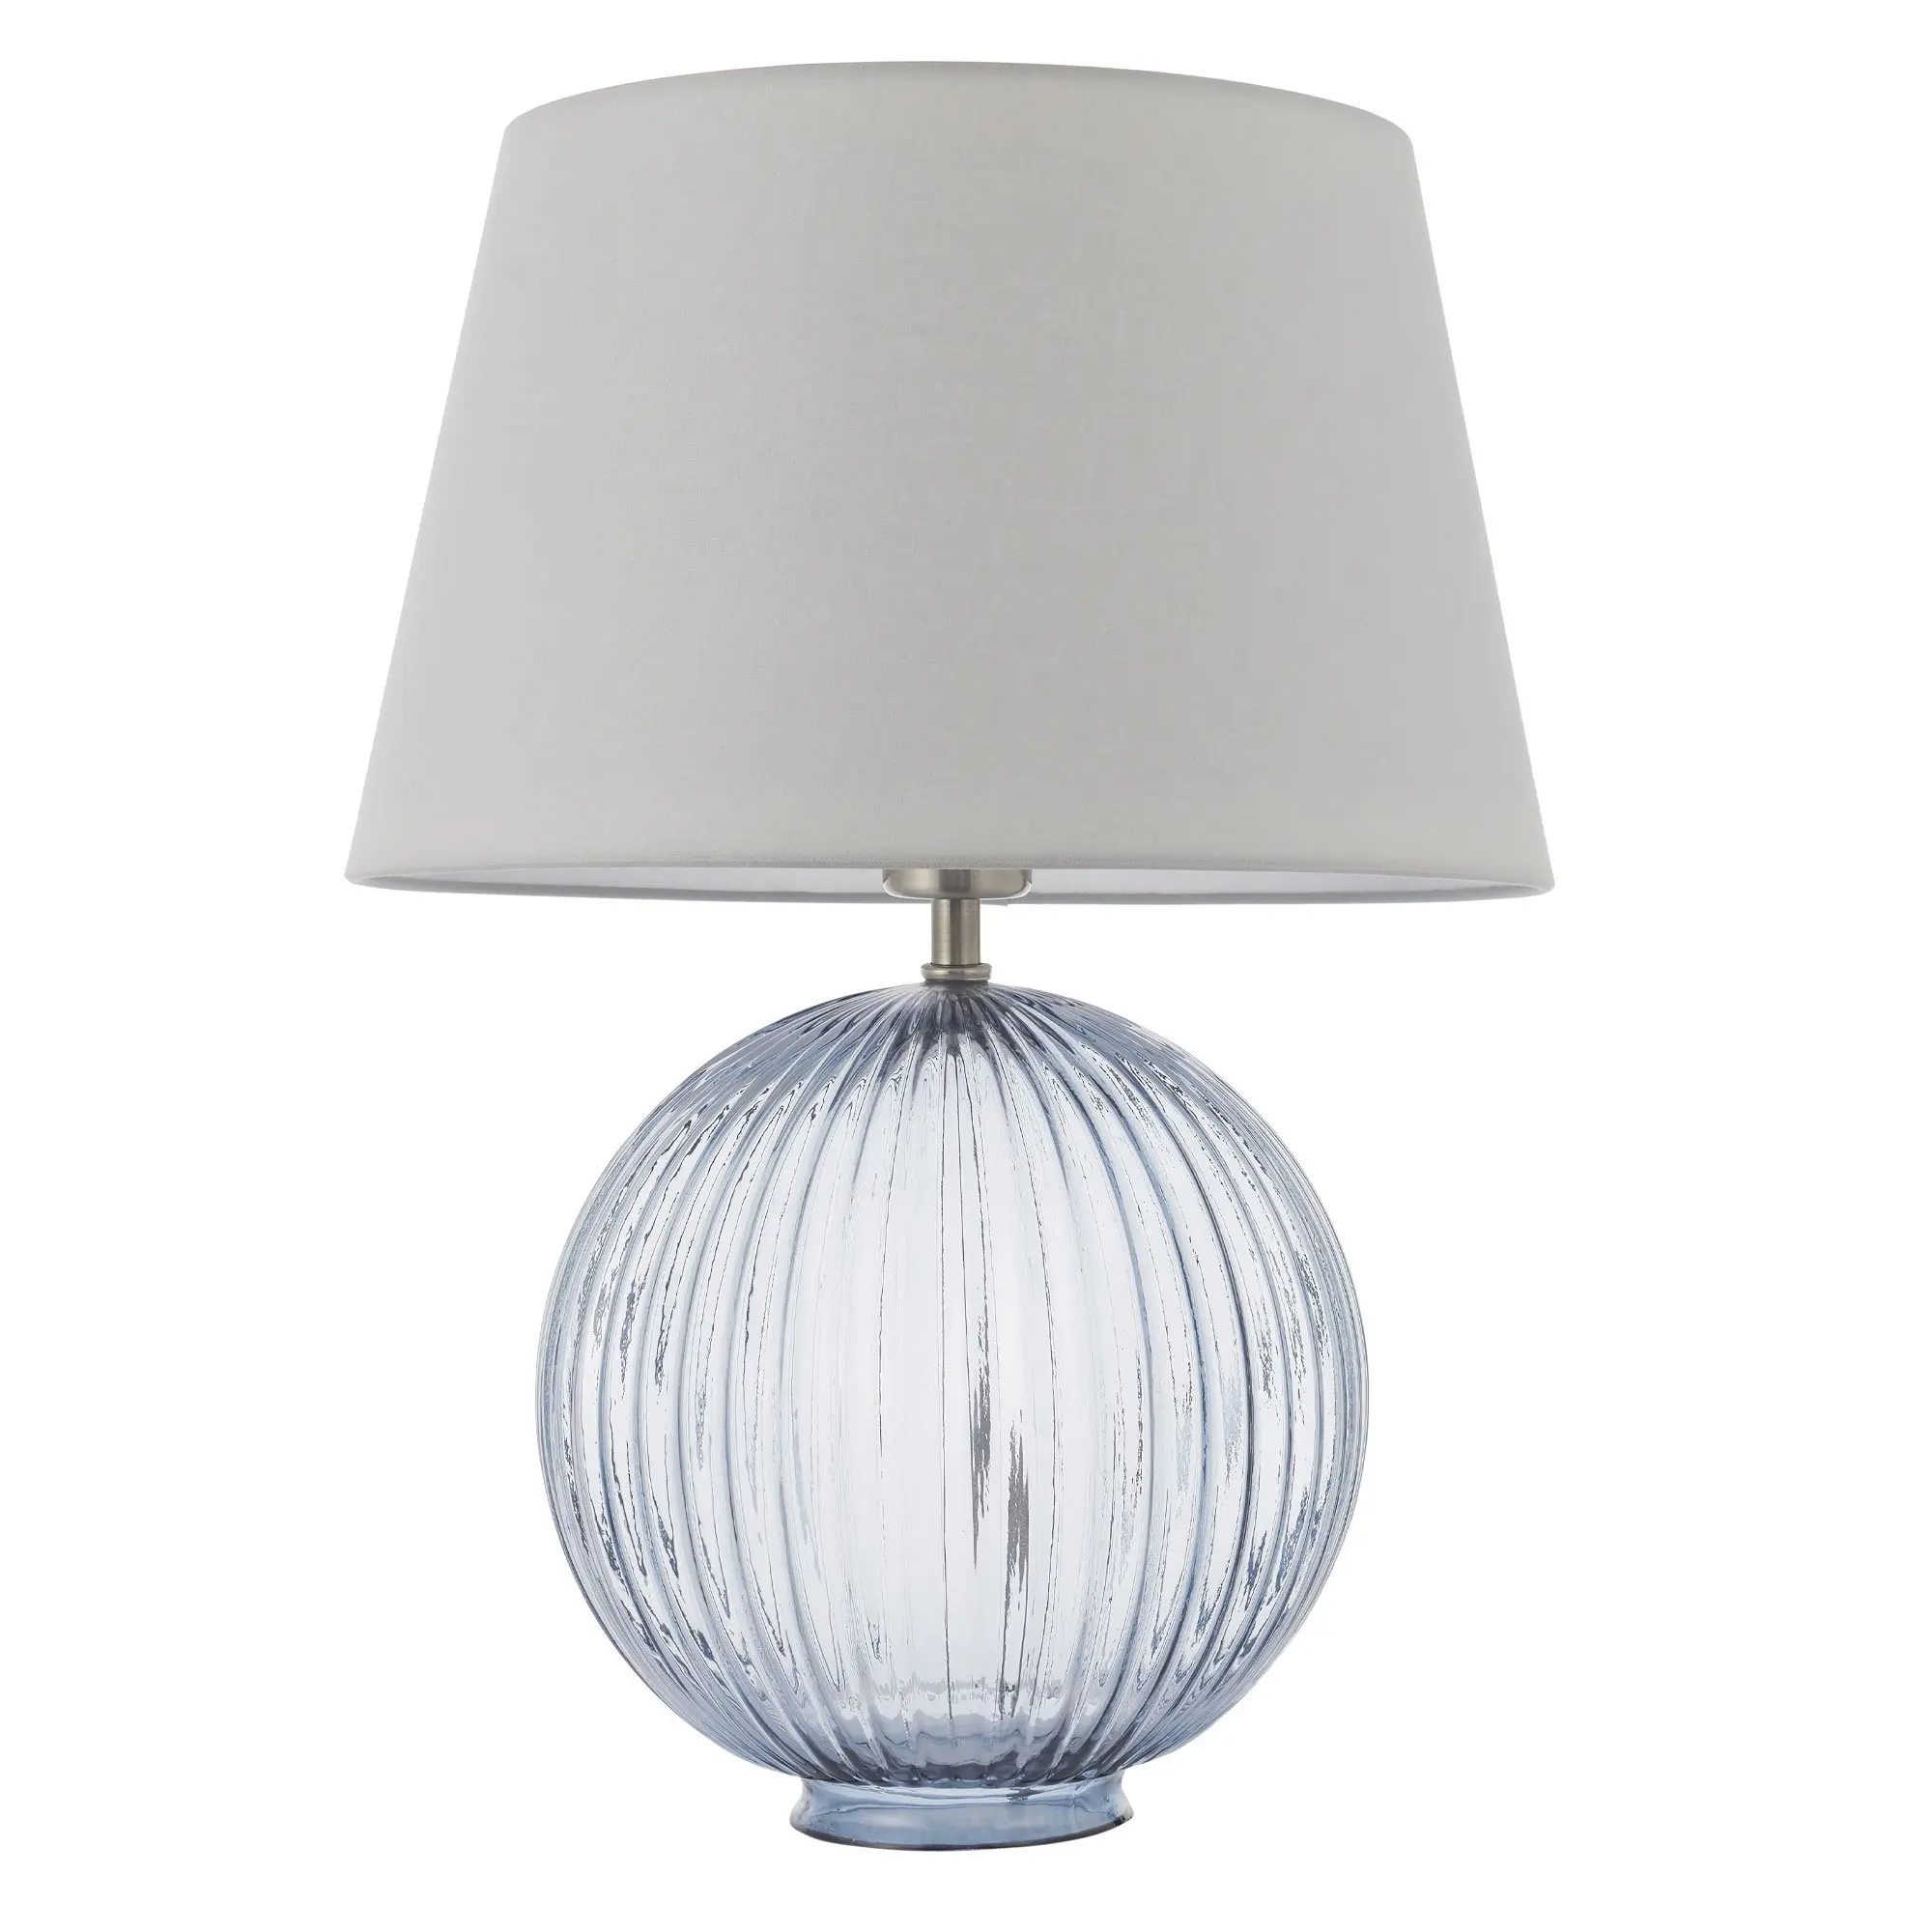 smoked glass table lamp tesco - What do vintage lamps look like